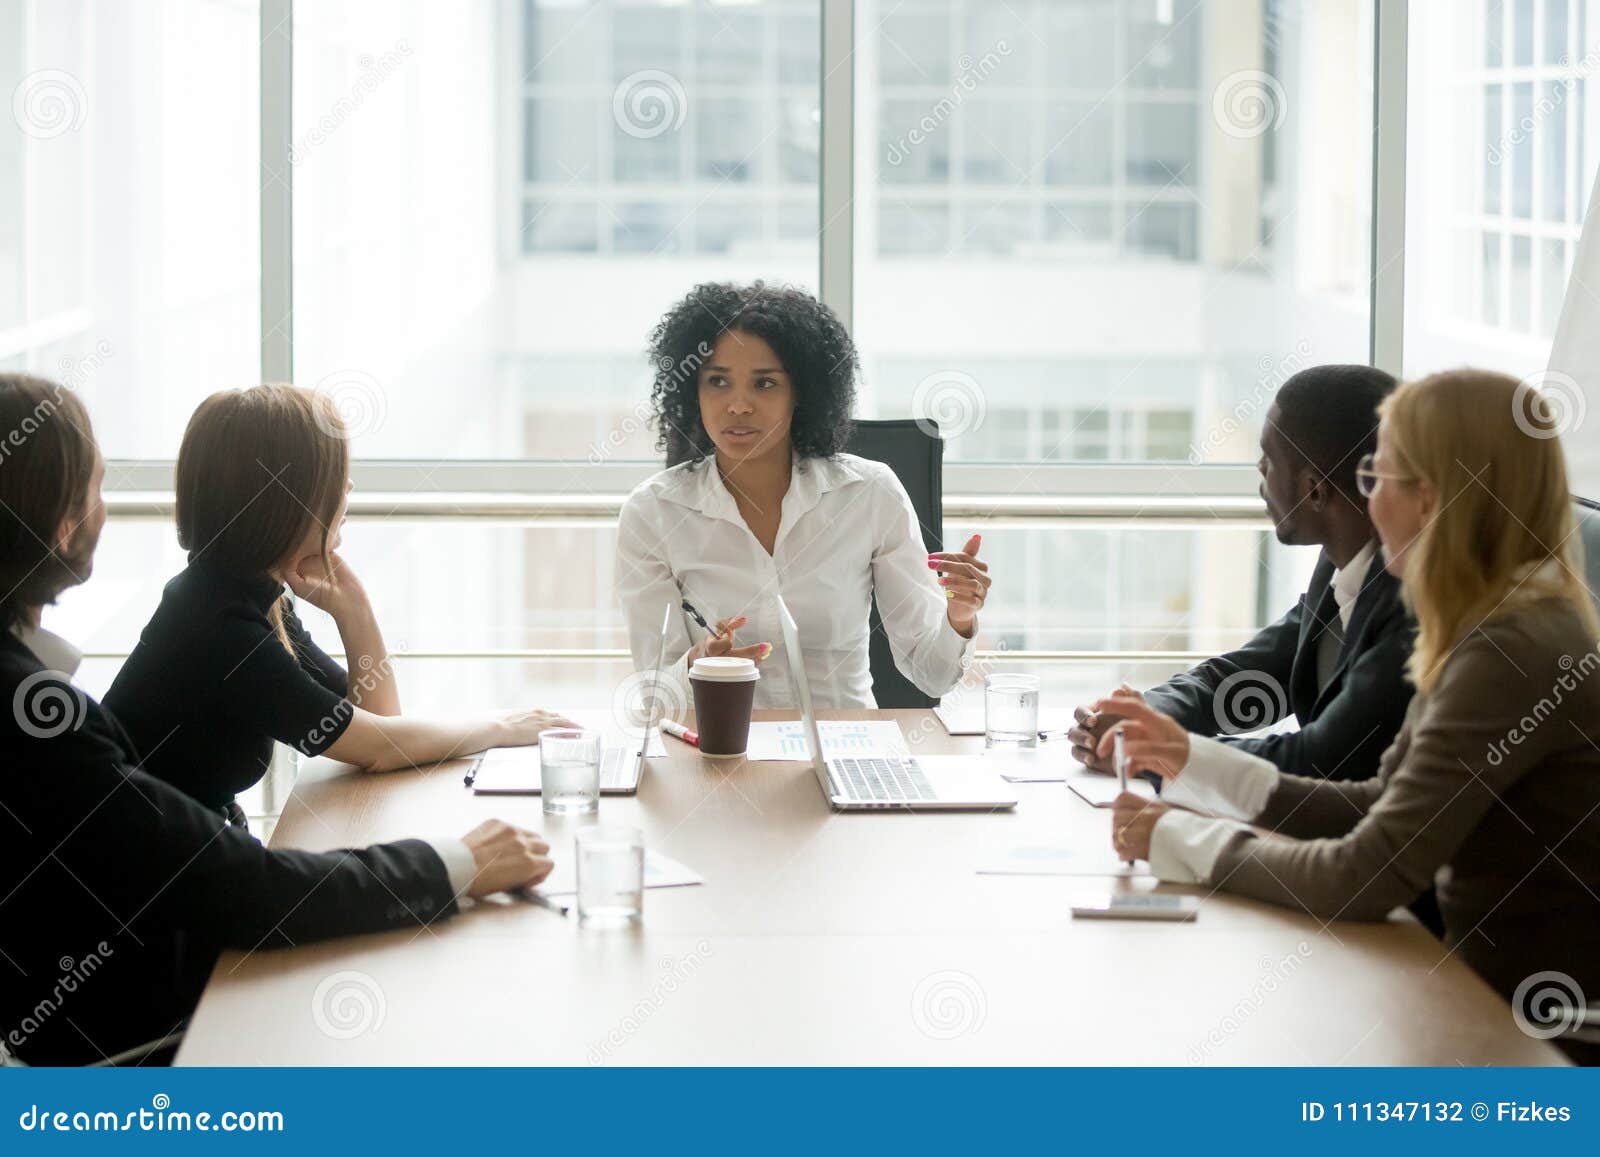 black female boss leading corporate meeting talking to diverse b